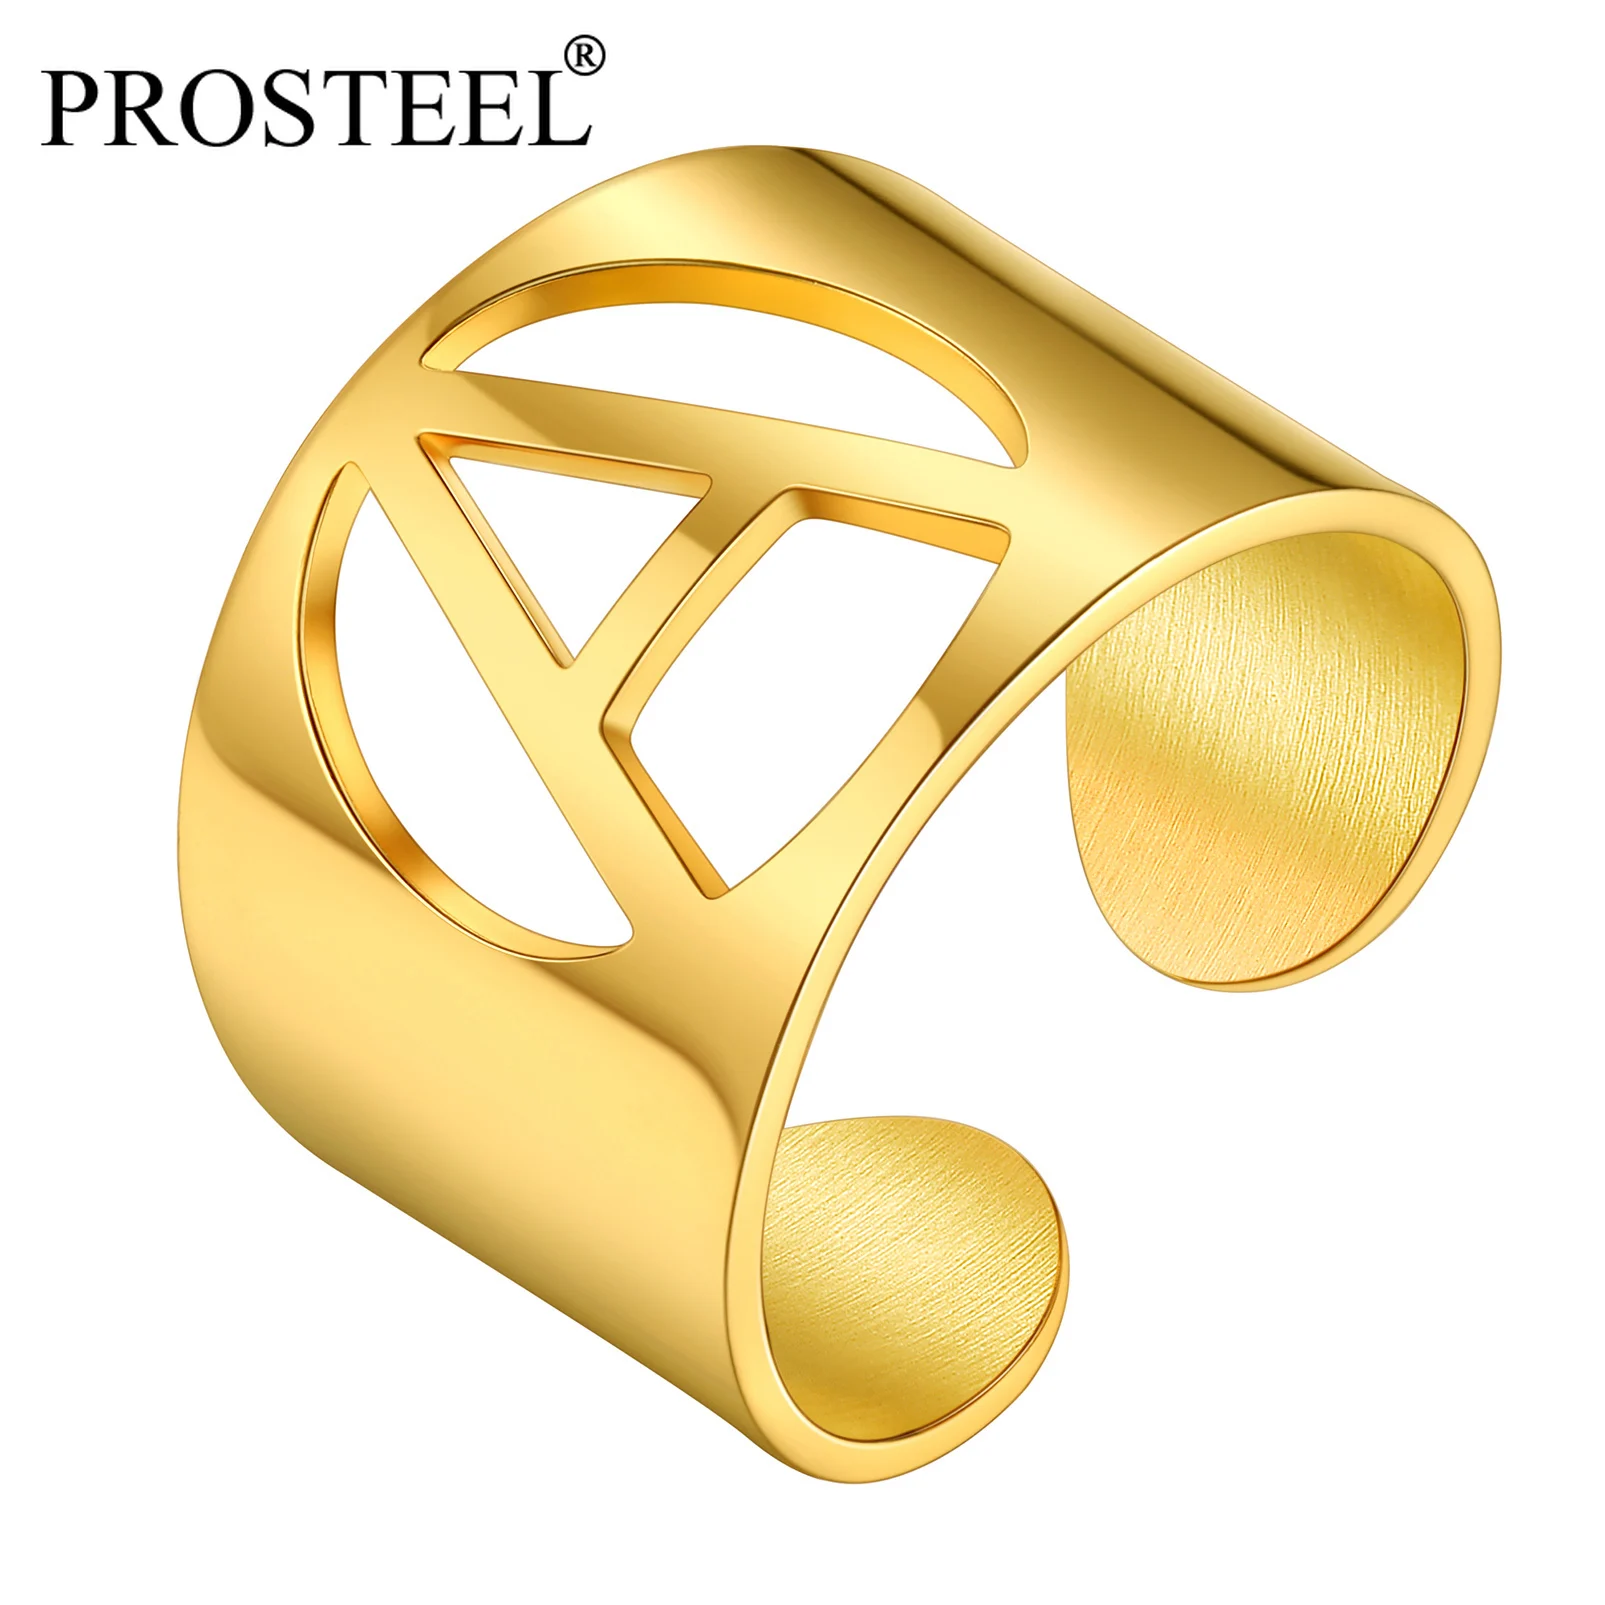 

PROSTEEL Initial Letter A-Z Cuff Ring 15mm Wide Band Open Ring Adjustable fits size6-12 Statement Ring for Male Female PSR4795